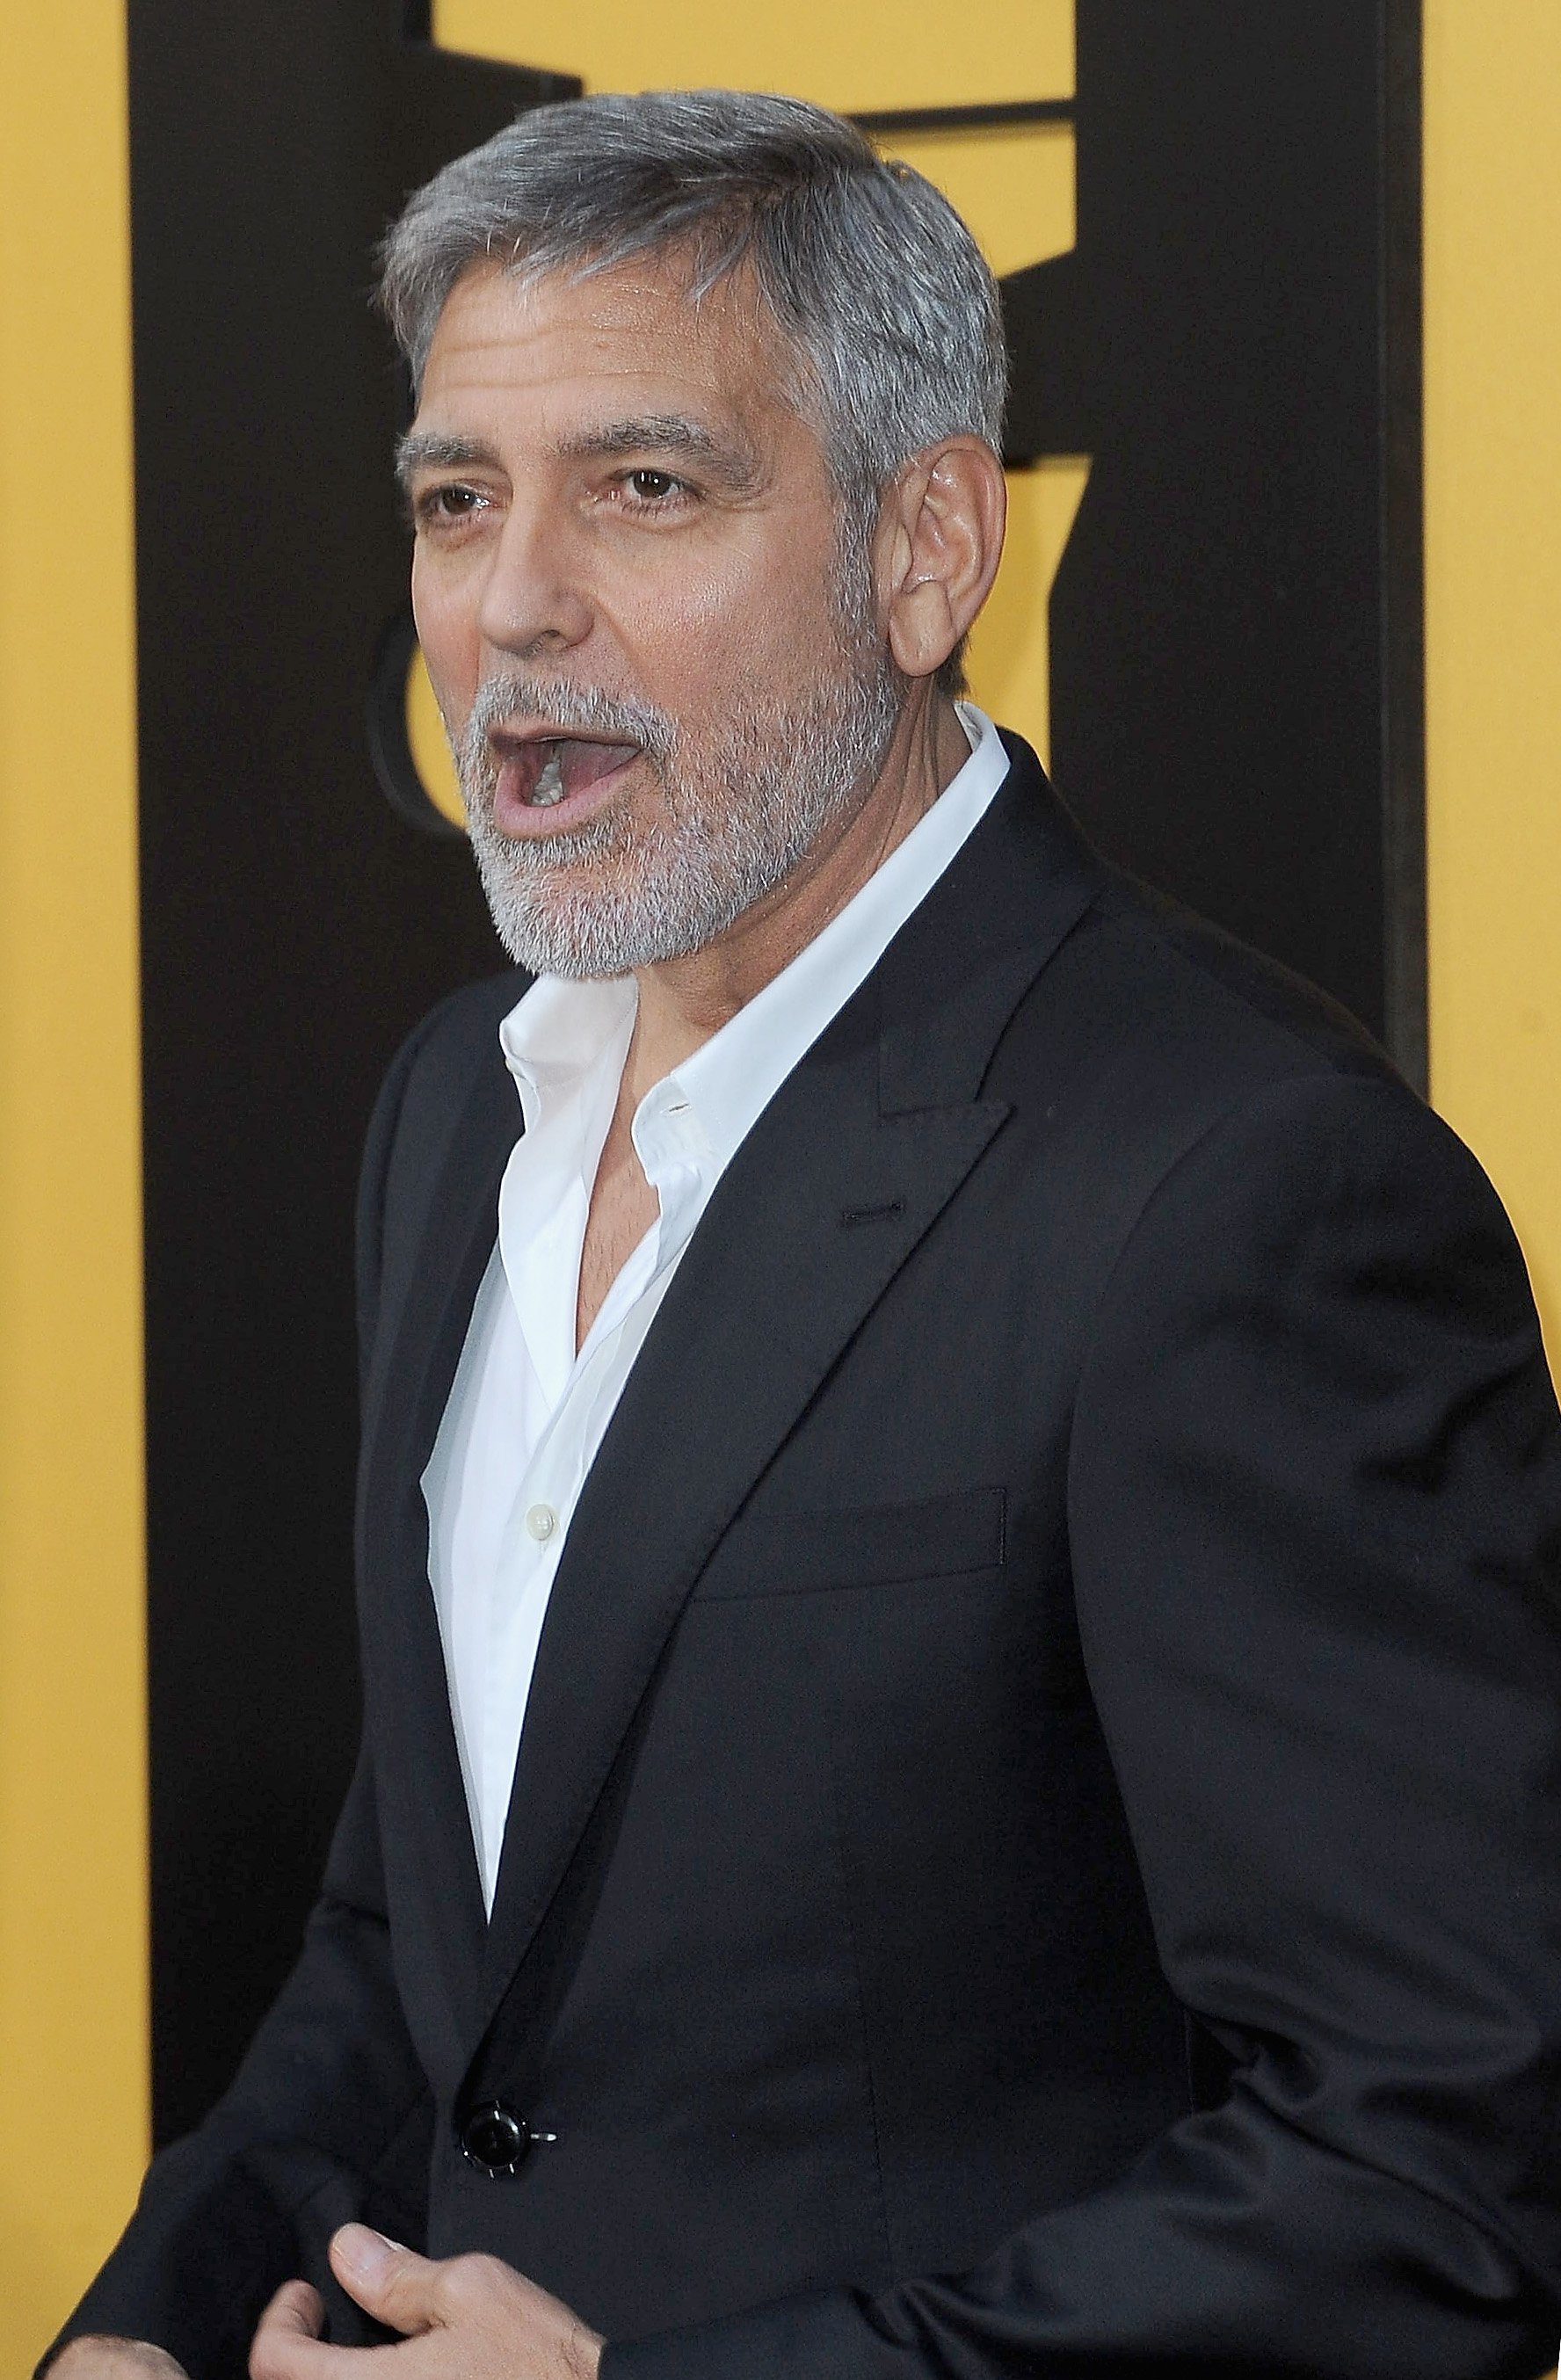 George Clooney attends the premiere of "Catch-22" in Hollywood, California on May 7, 2019 | Photo: Getty Images